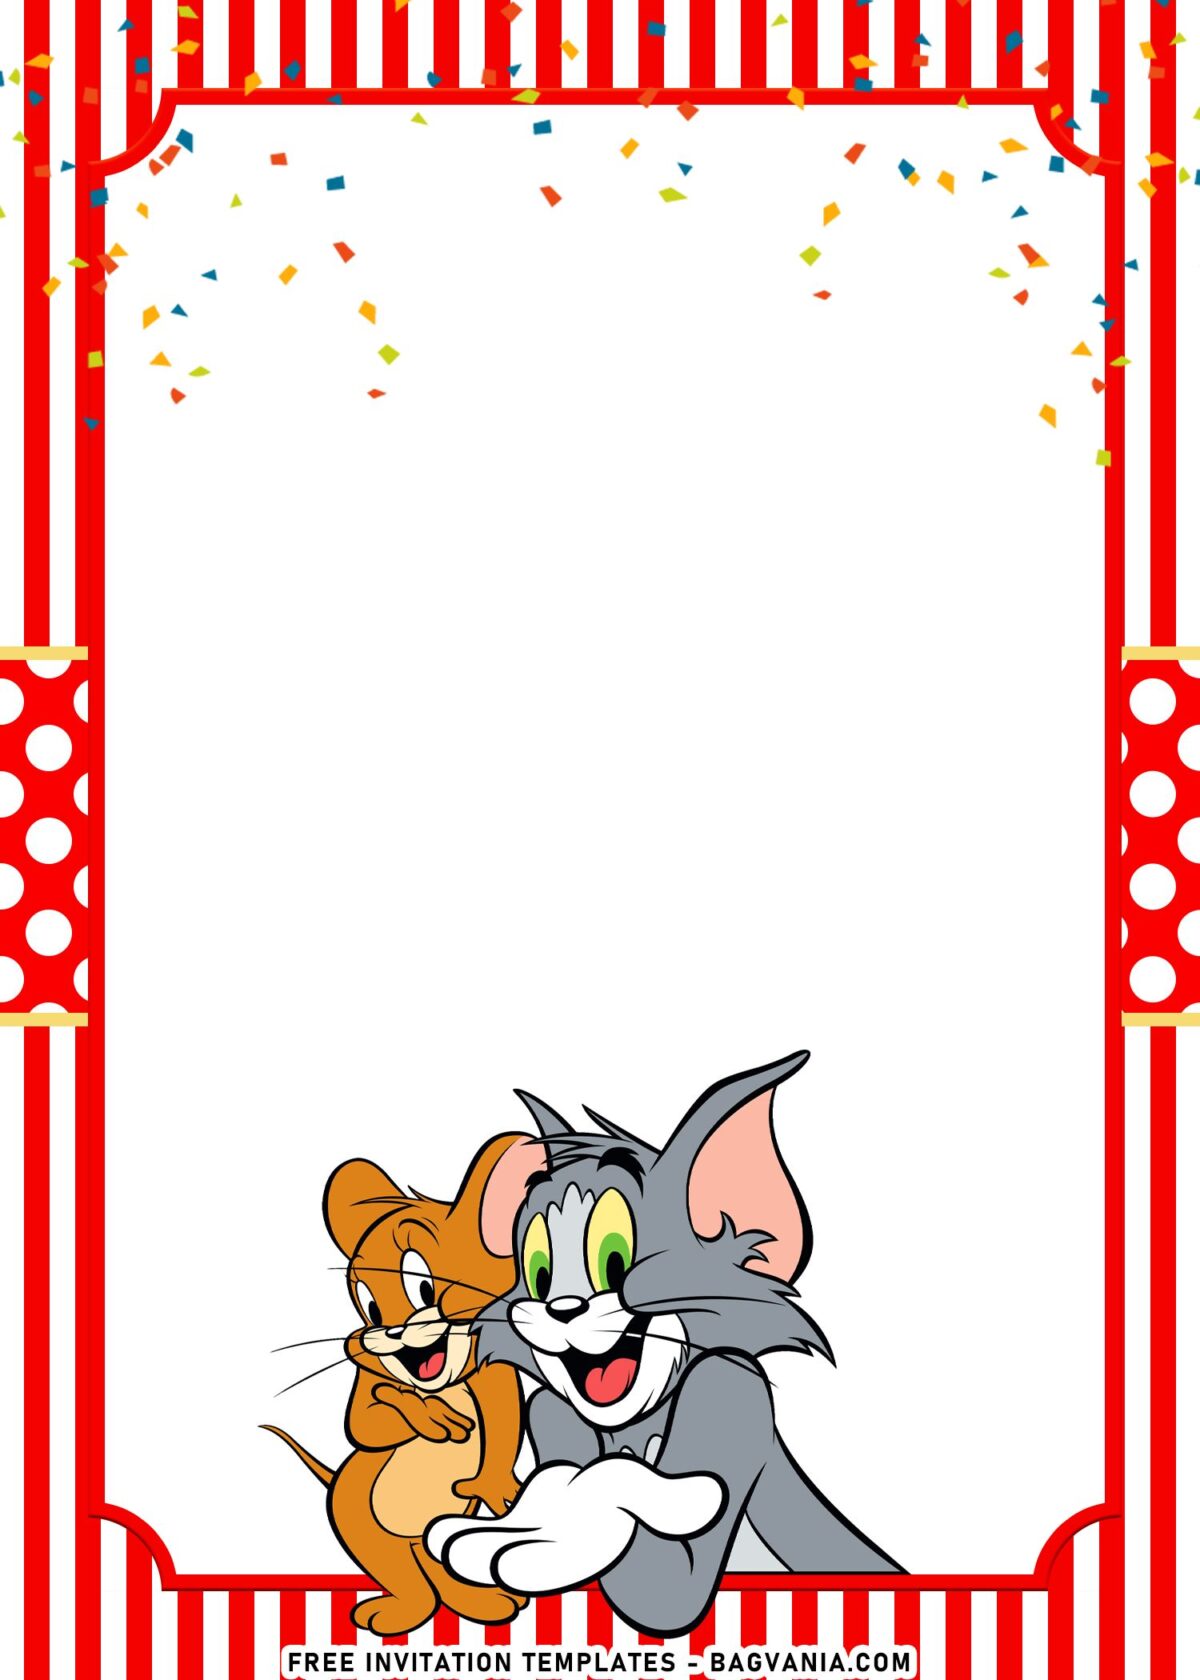 10+ Cartoon Tom And Jerry Birthday Invitation Templates with adorable Tom and Jerry is peacefully sitting next to each other's 